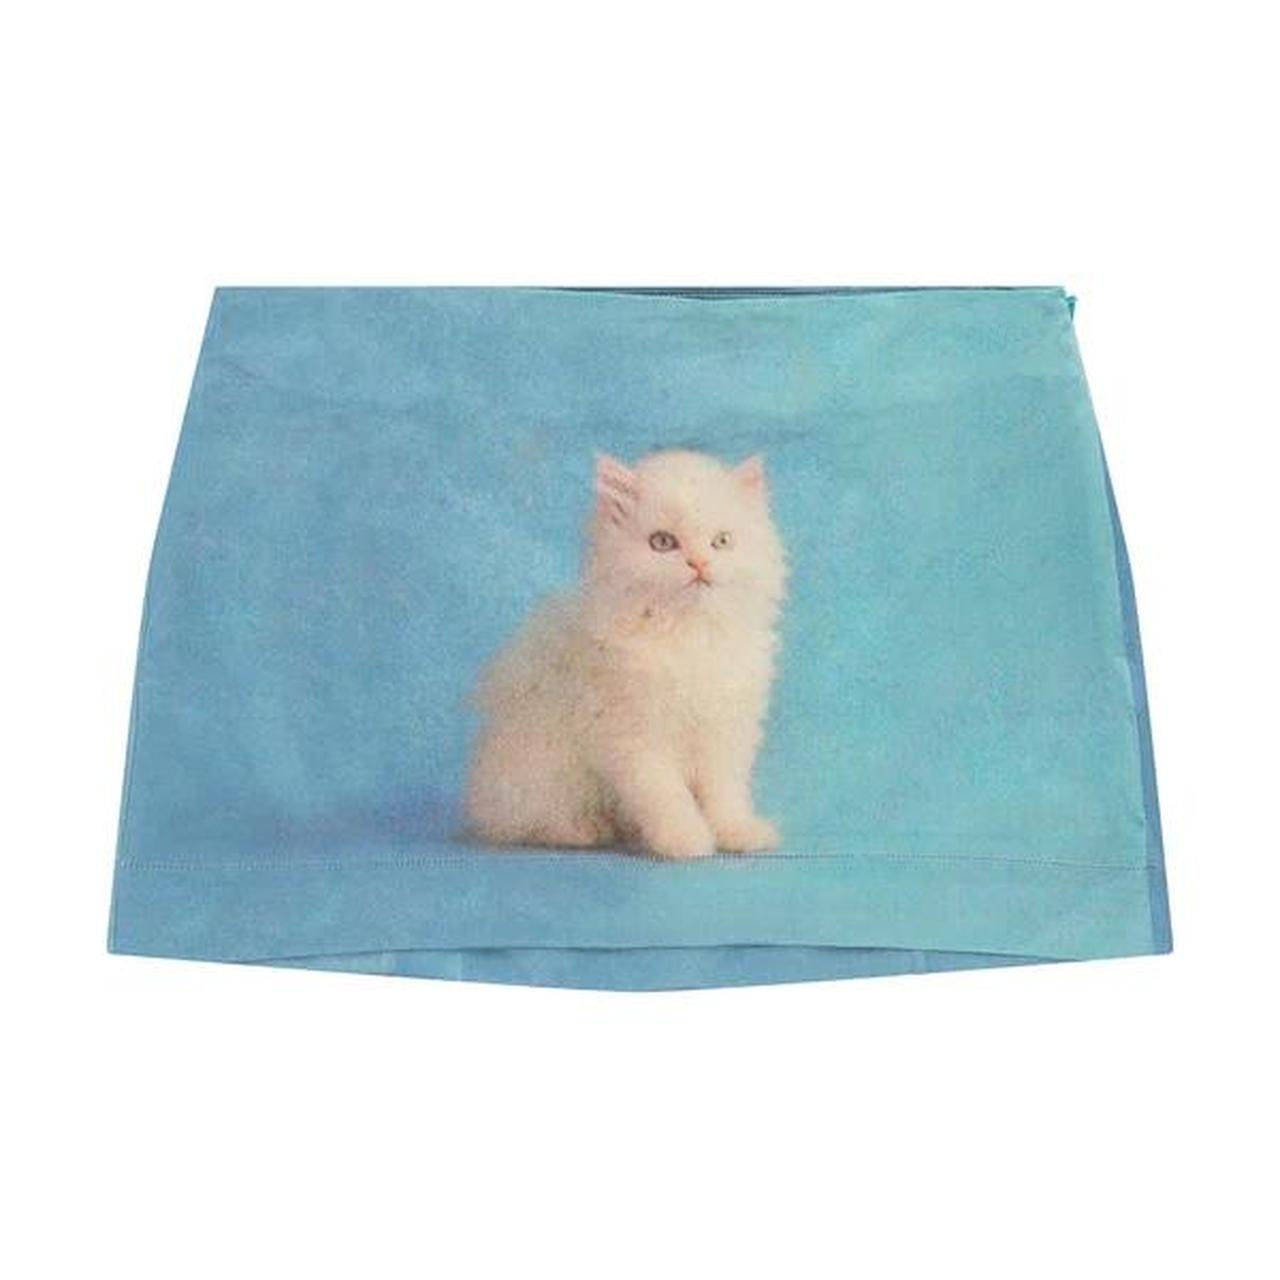 ISO ASHLEY WILLIAMS BLUE CAT SKIRT SIZE XS OR S DO... - Depop